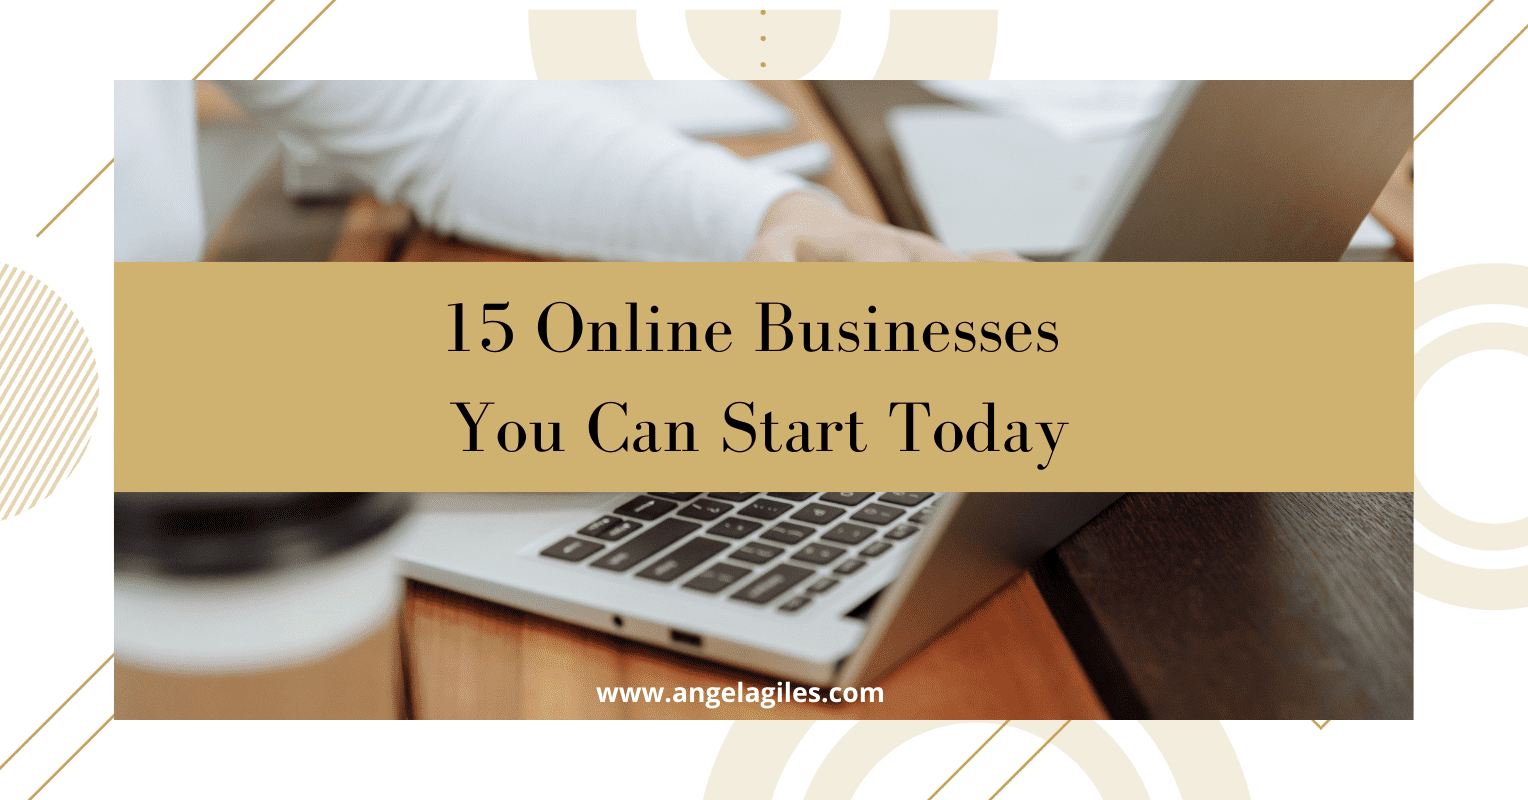 15 Online Businesses You Can Start Today